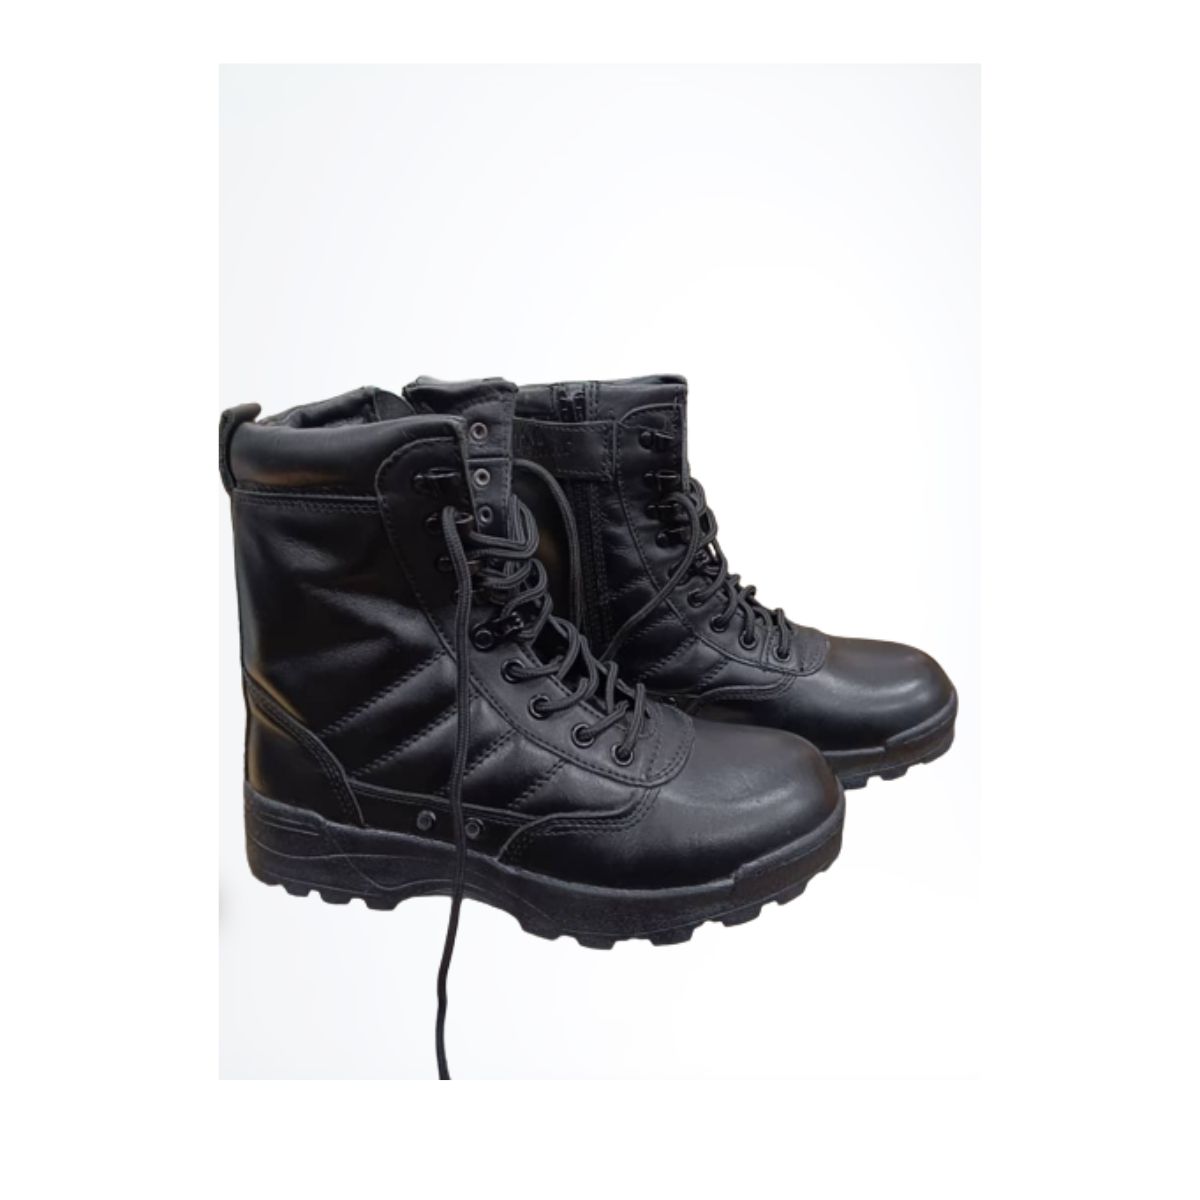 Tactical Boot - Black - Size 41